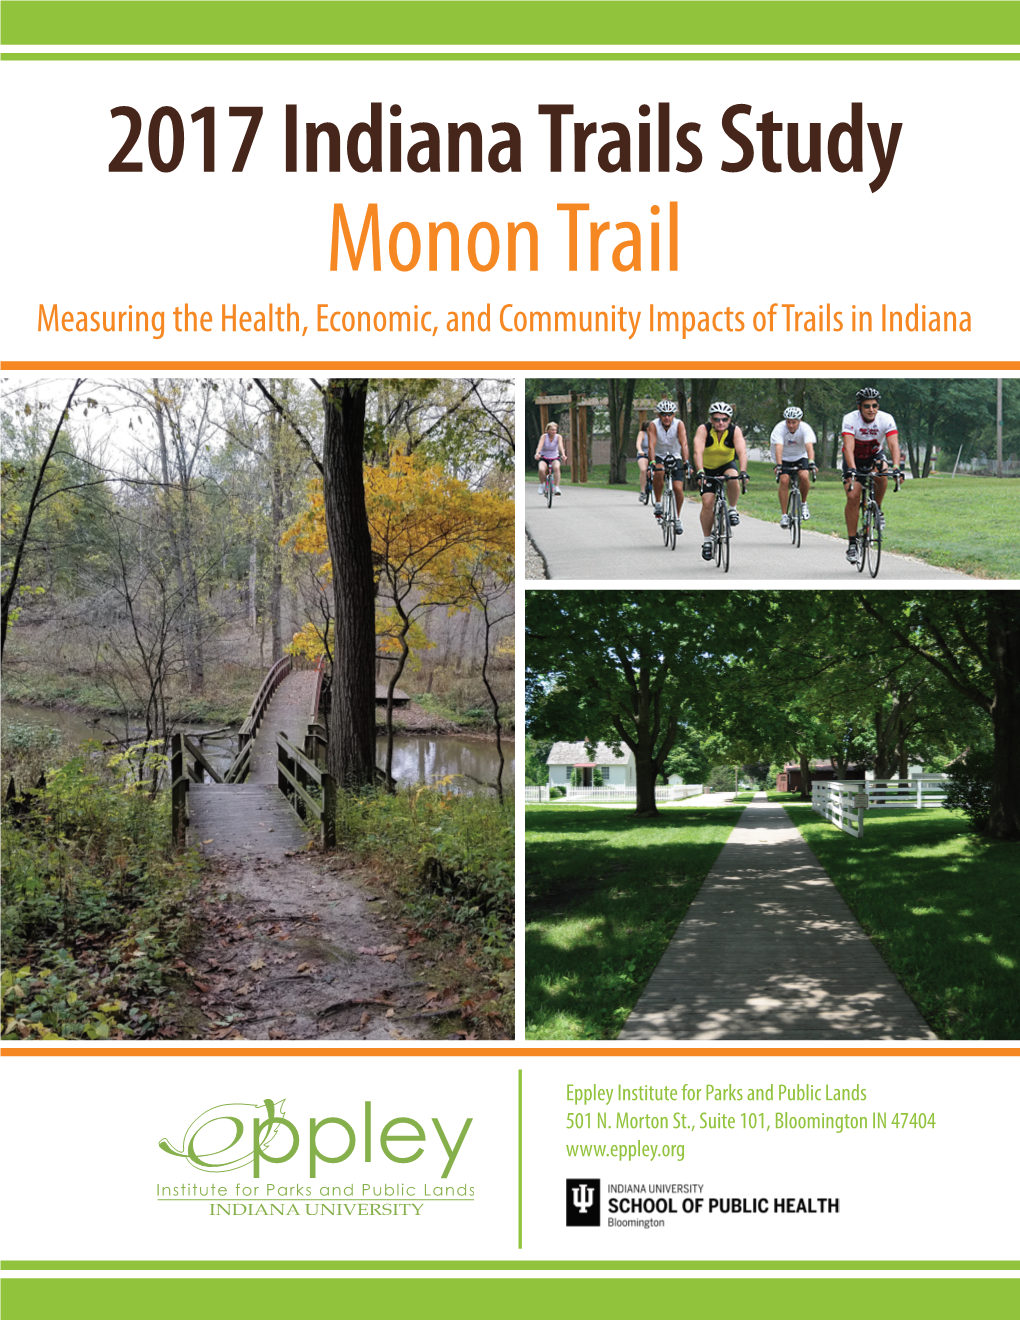 Monon Trail Measuring the Health, Economic, and Community Impacts of Trails in Indiana